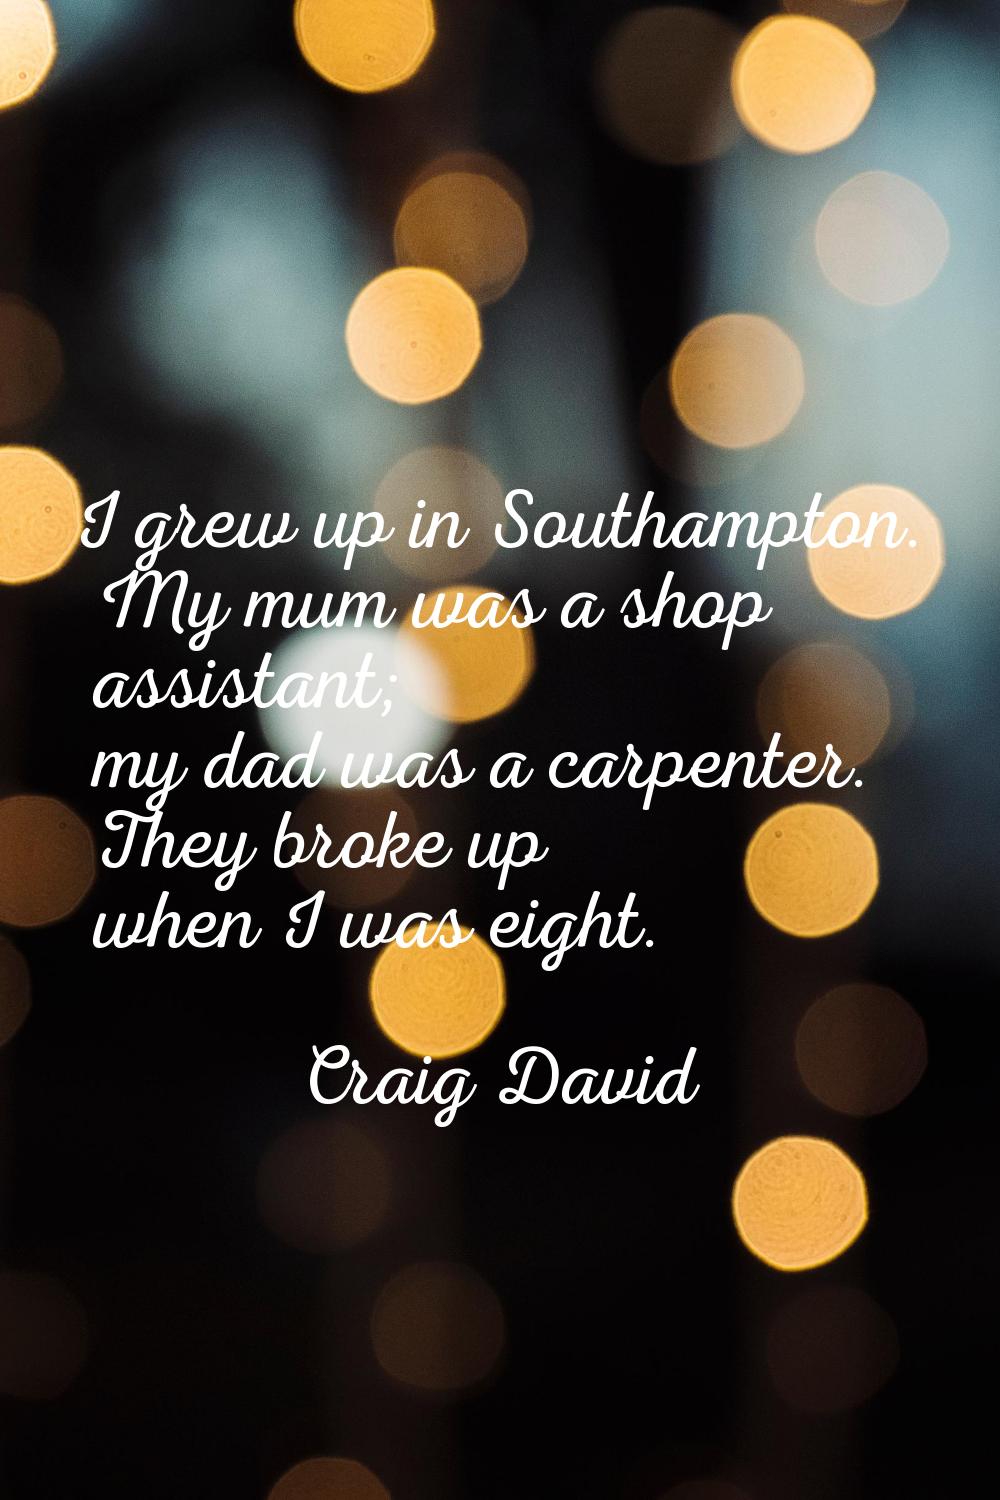 I grew up in Southampton. My mum was a shop assistant; my dad was a carpenter. They broke up when I